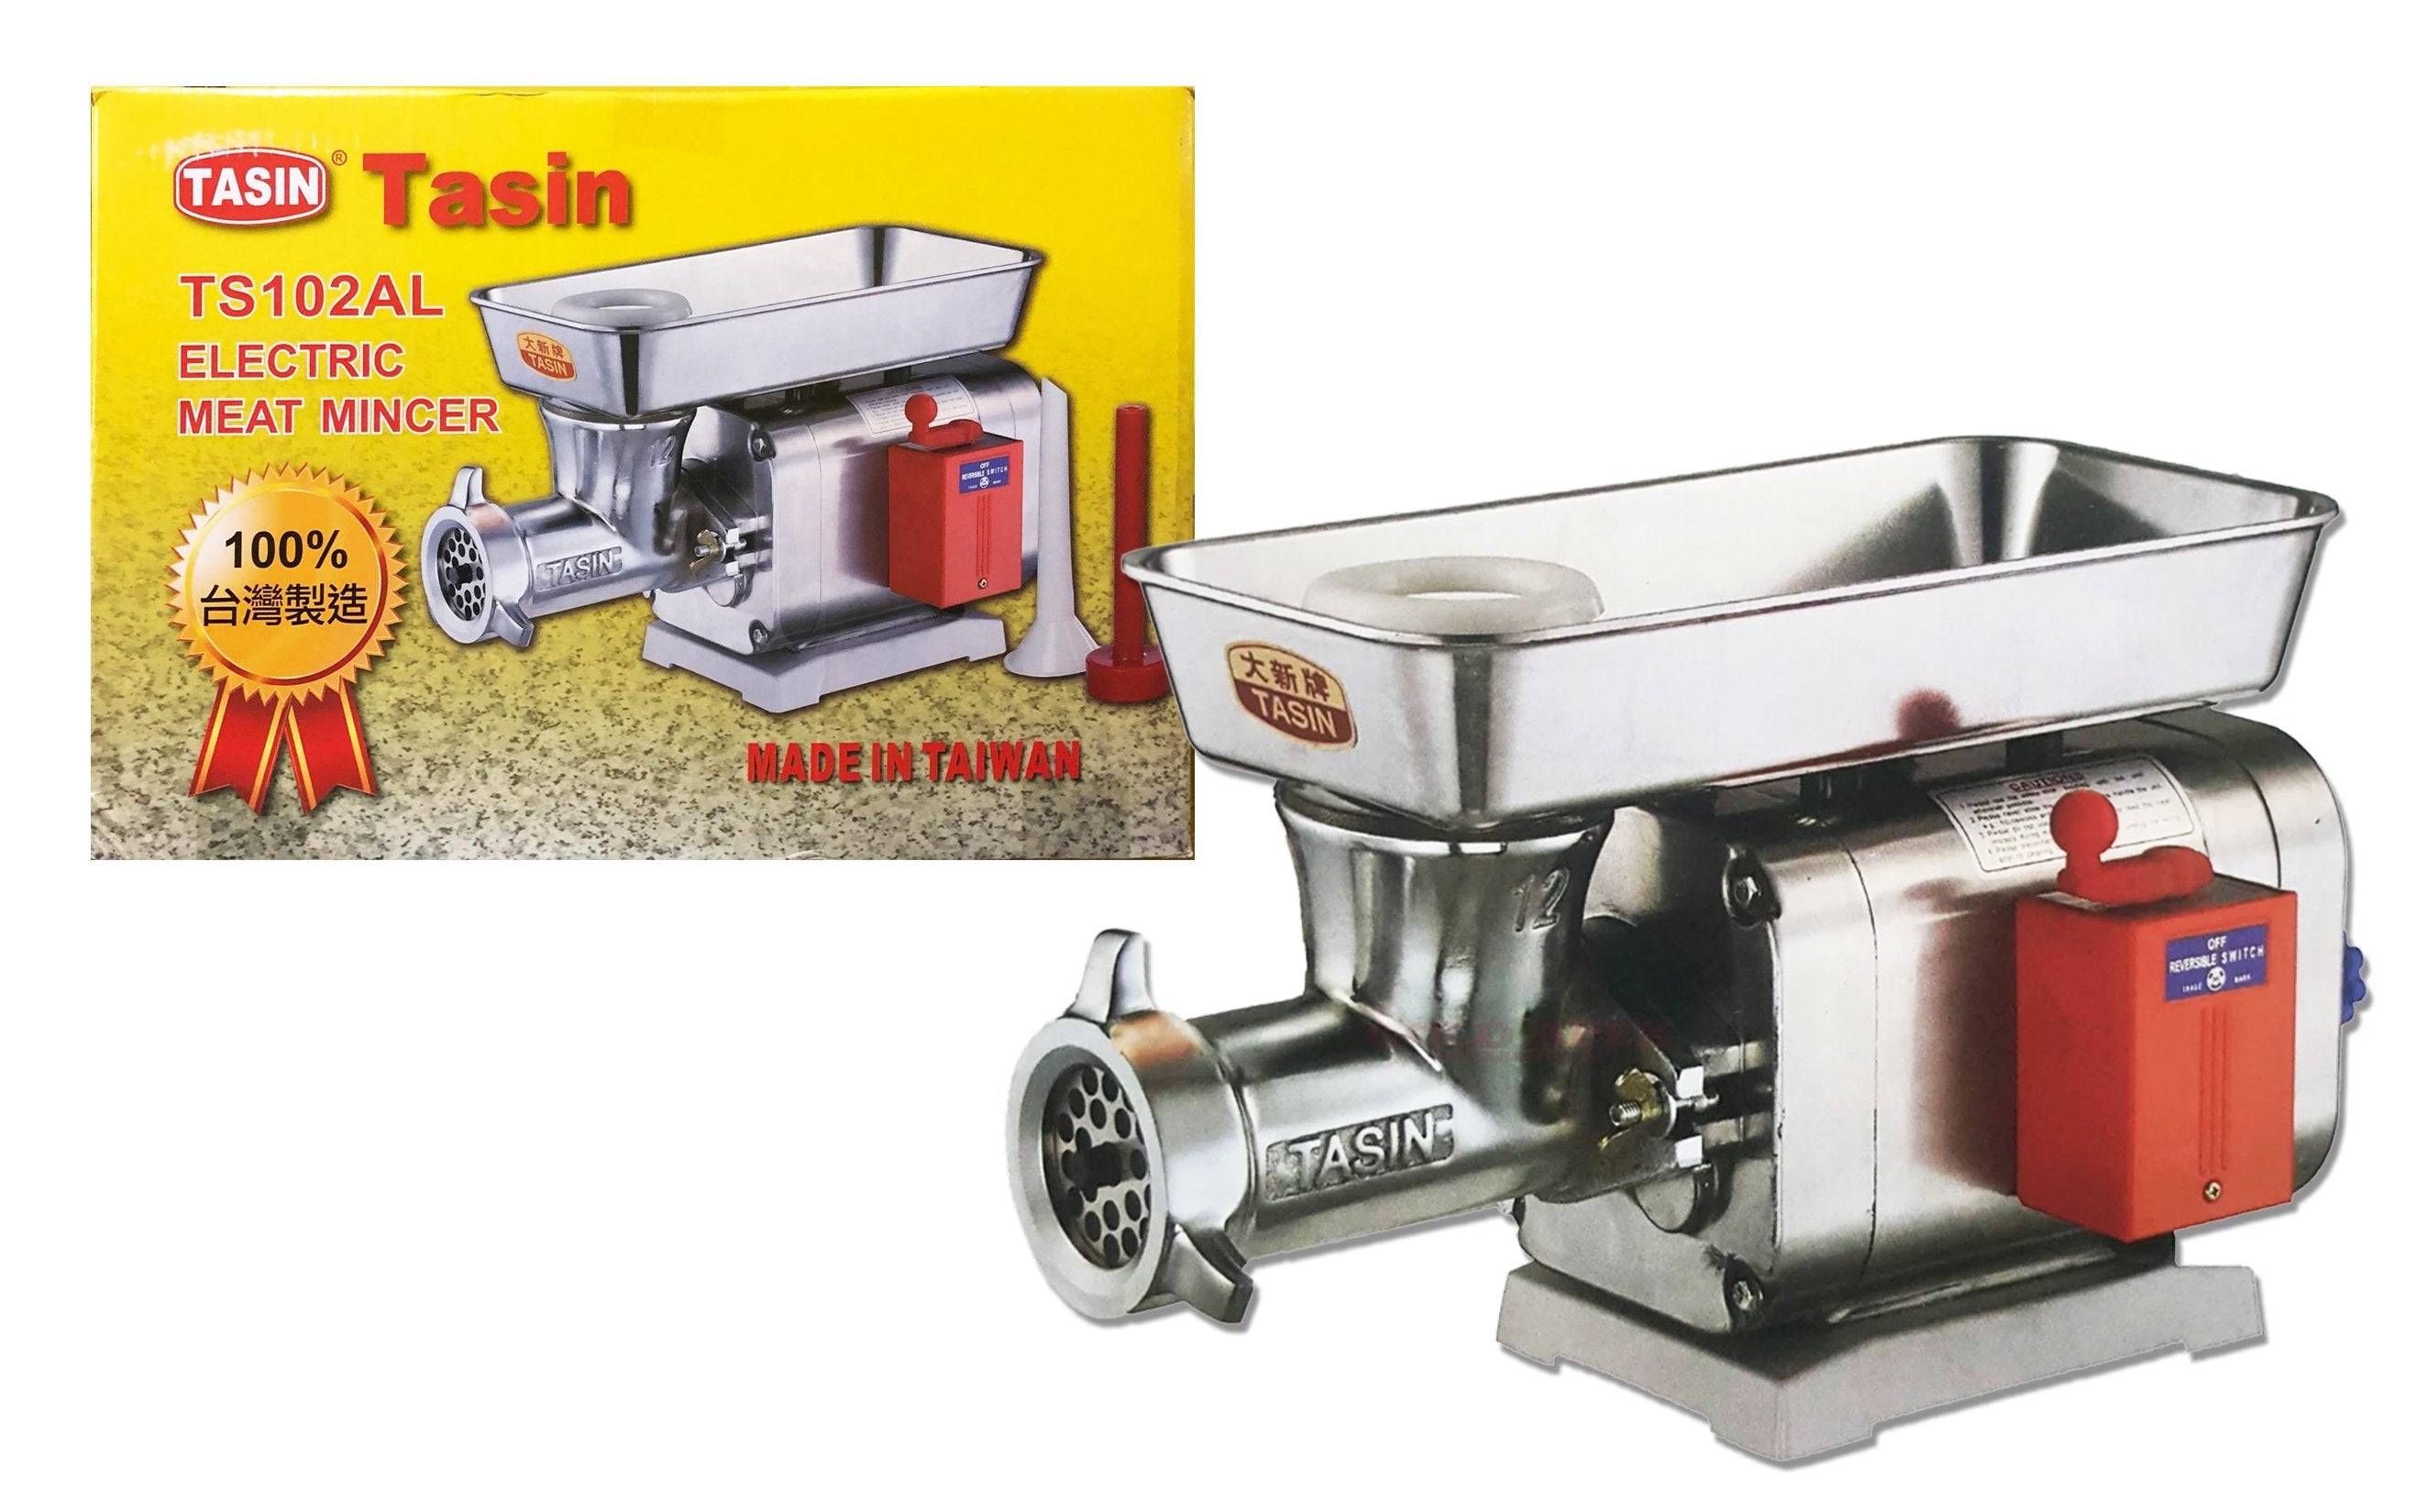 Tasin TS-102AL Stainless Electric Meat Mincer / Grinder - ToolsSavvy.ph